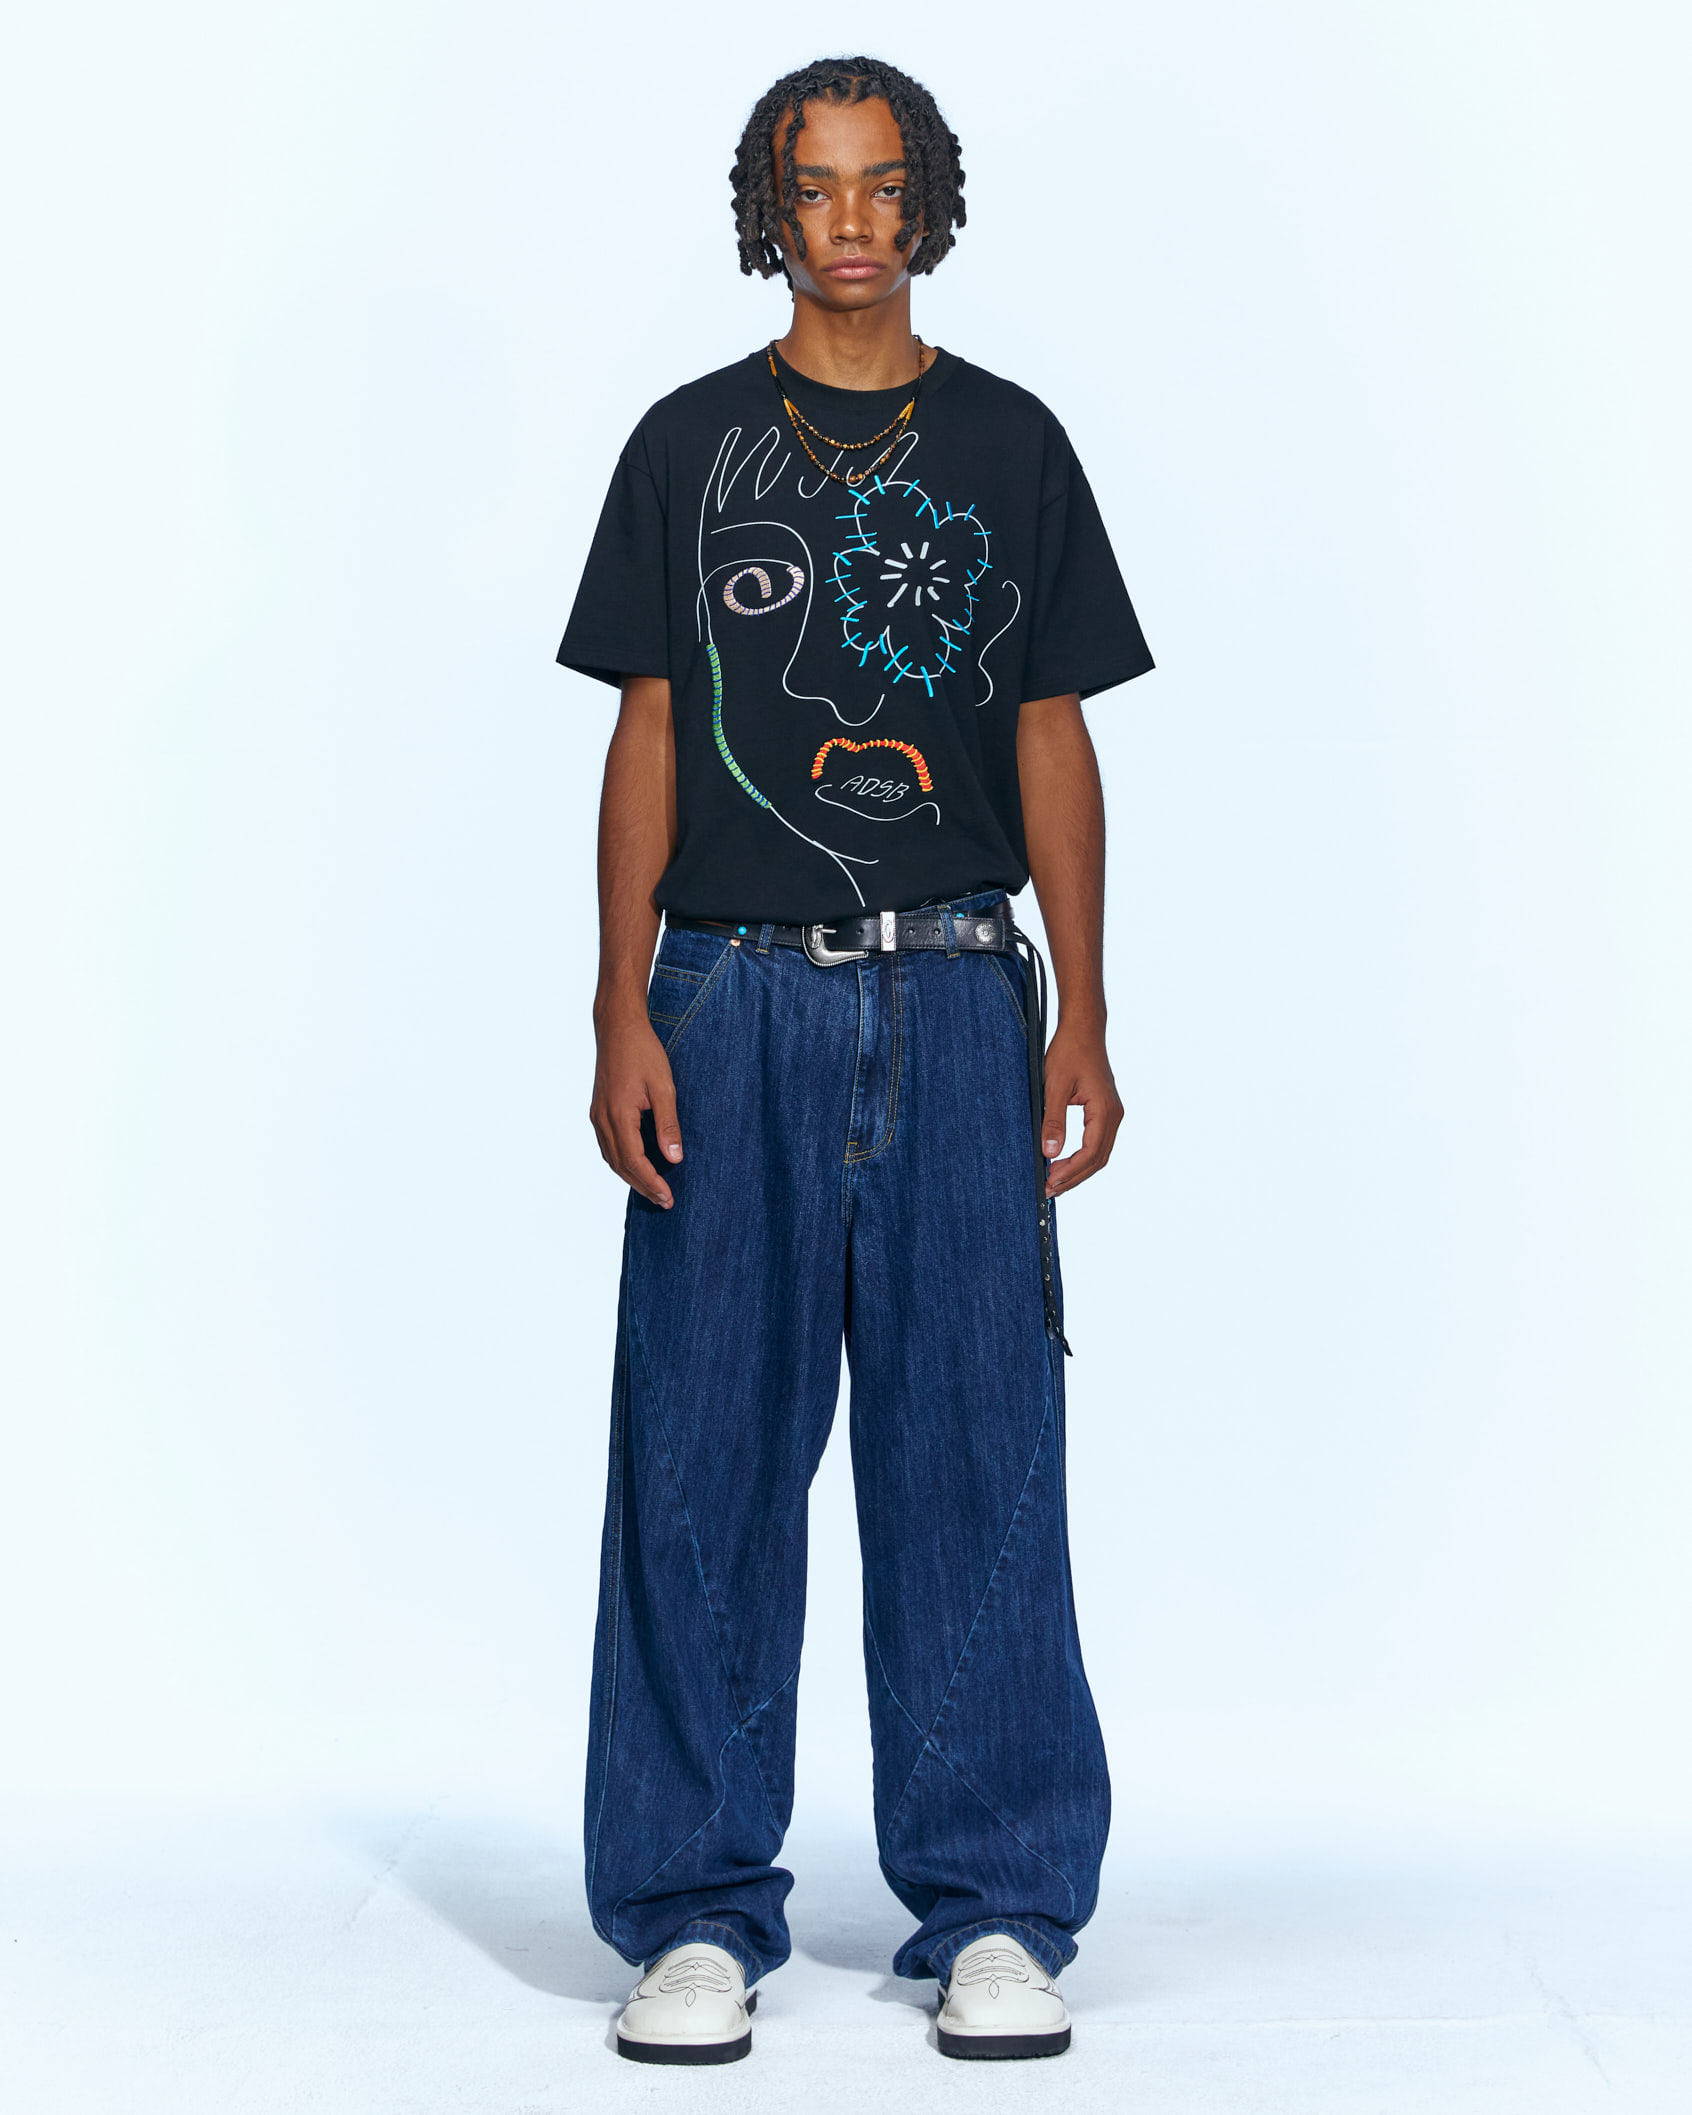 S/S RTW MEN 23 – Andersson Bell